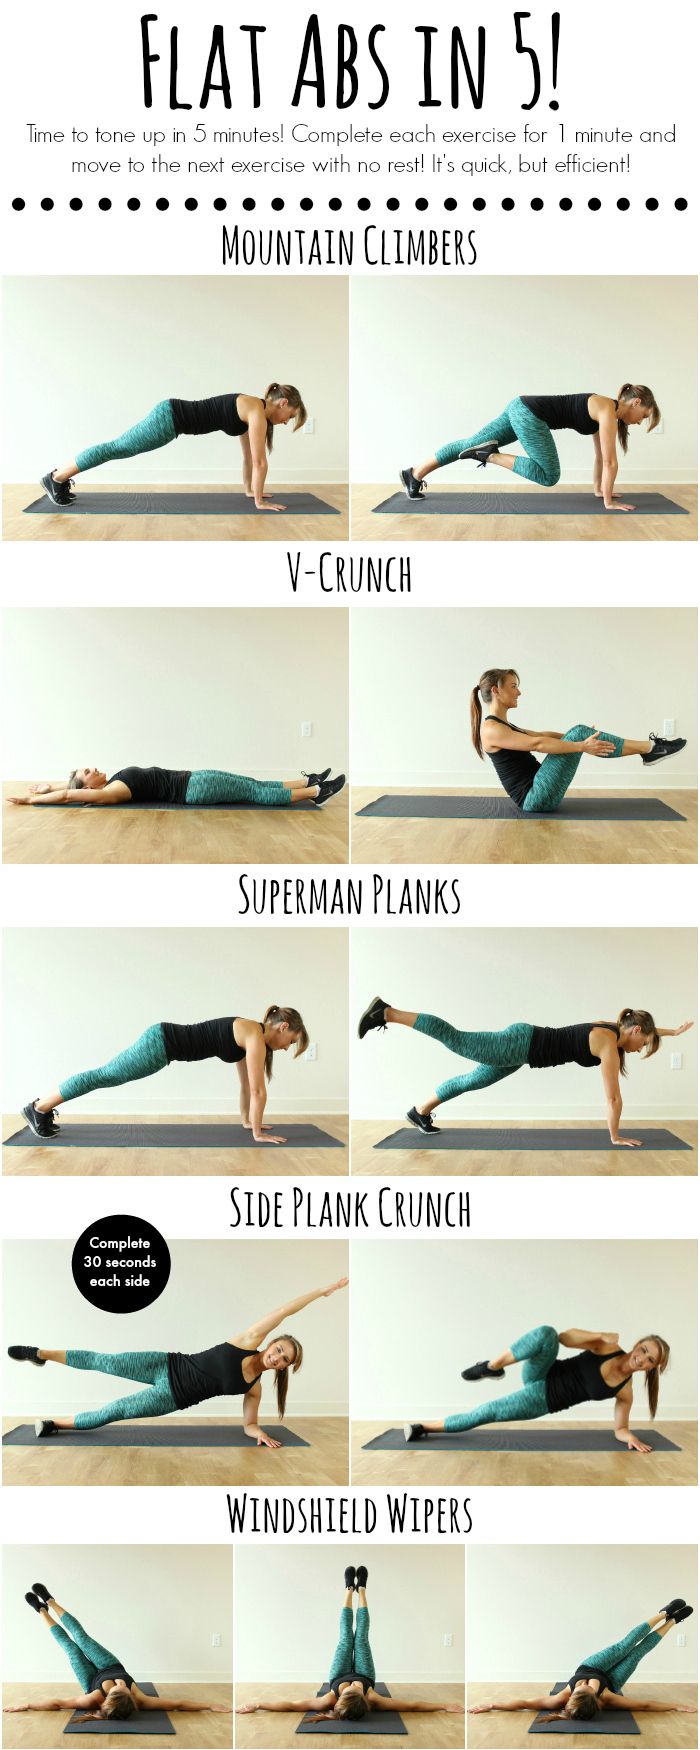 Flat Stomach Workout, Exercise Tips, Abs and Core Exercises